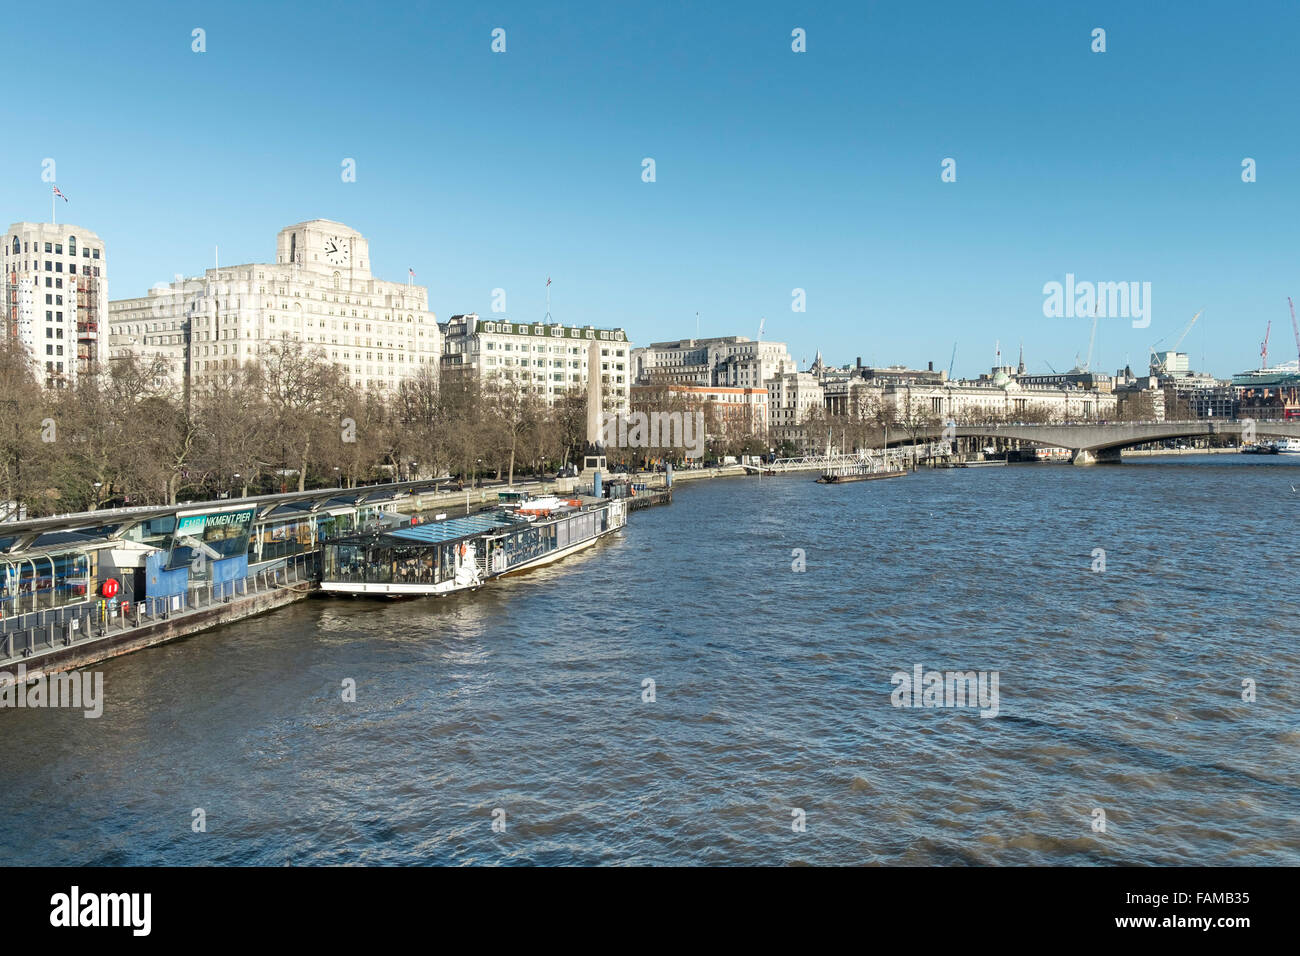 Buildings on the Embankment in London. Stock Photo